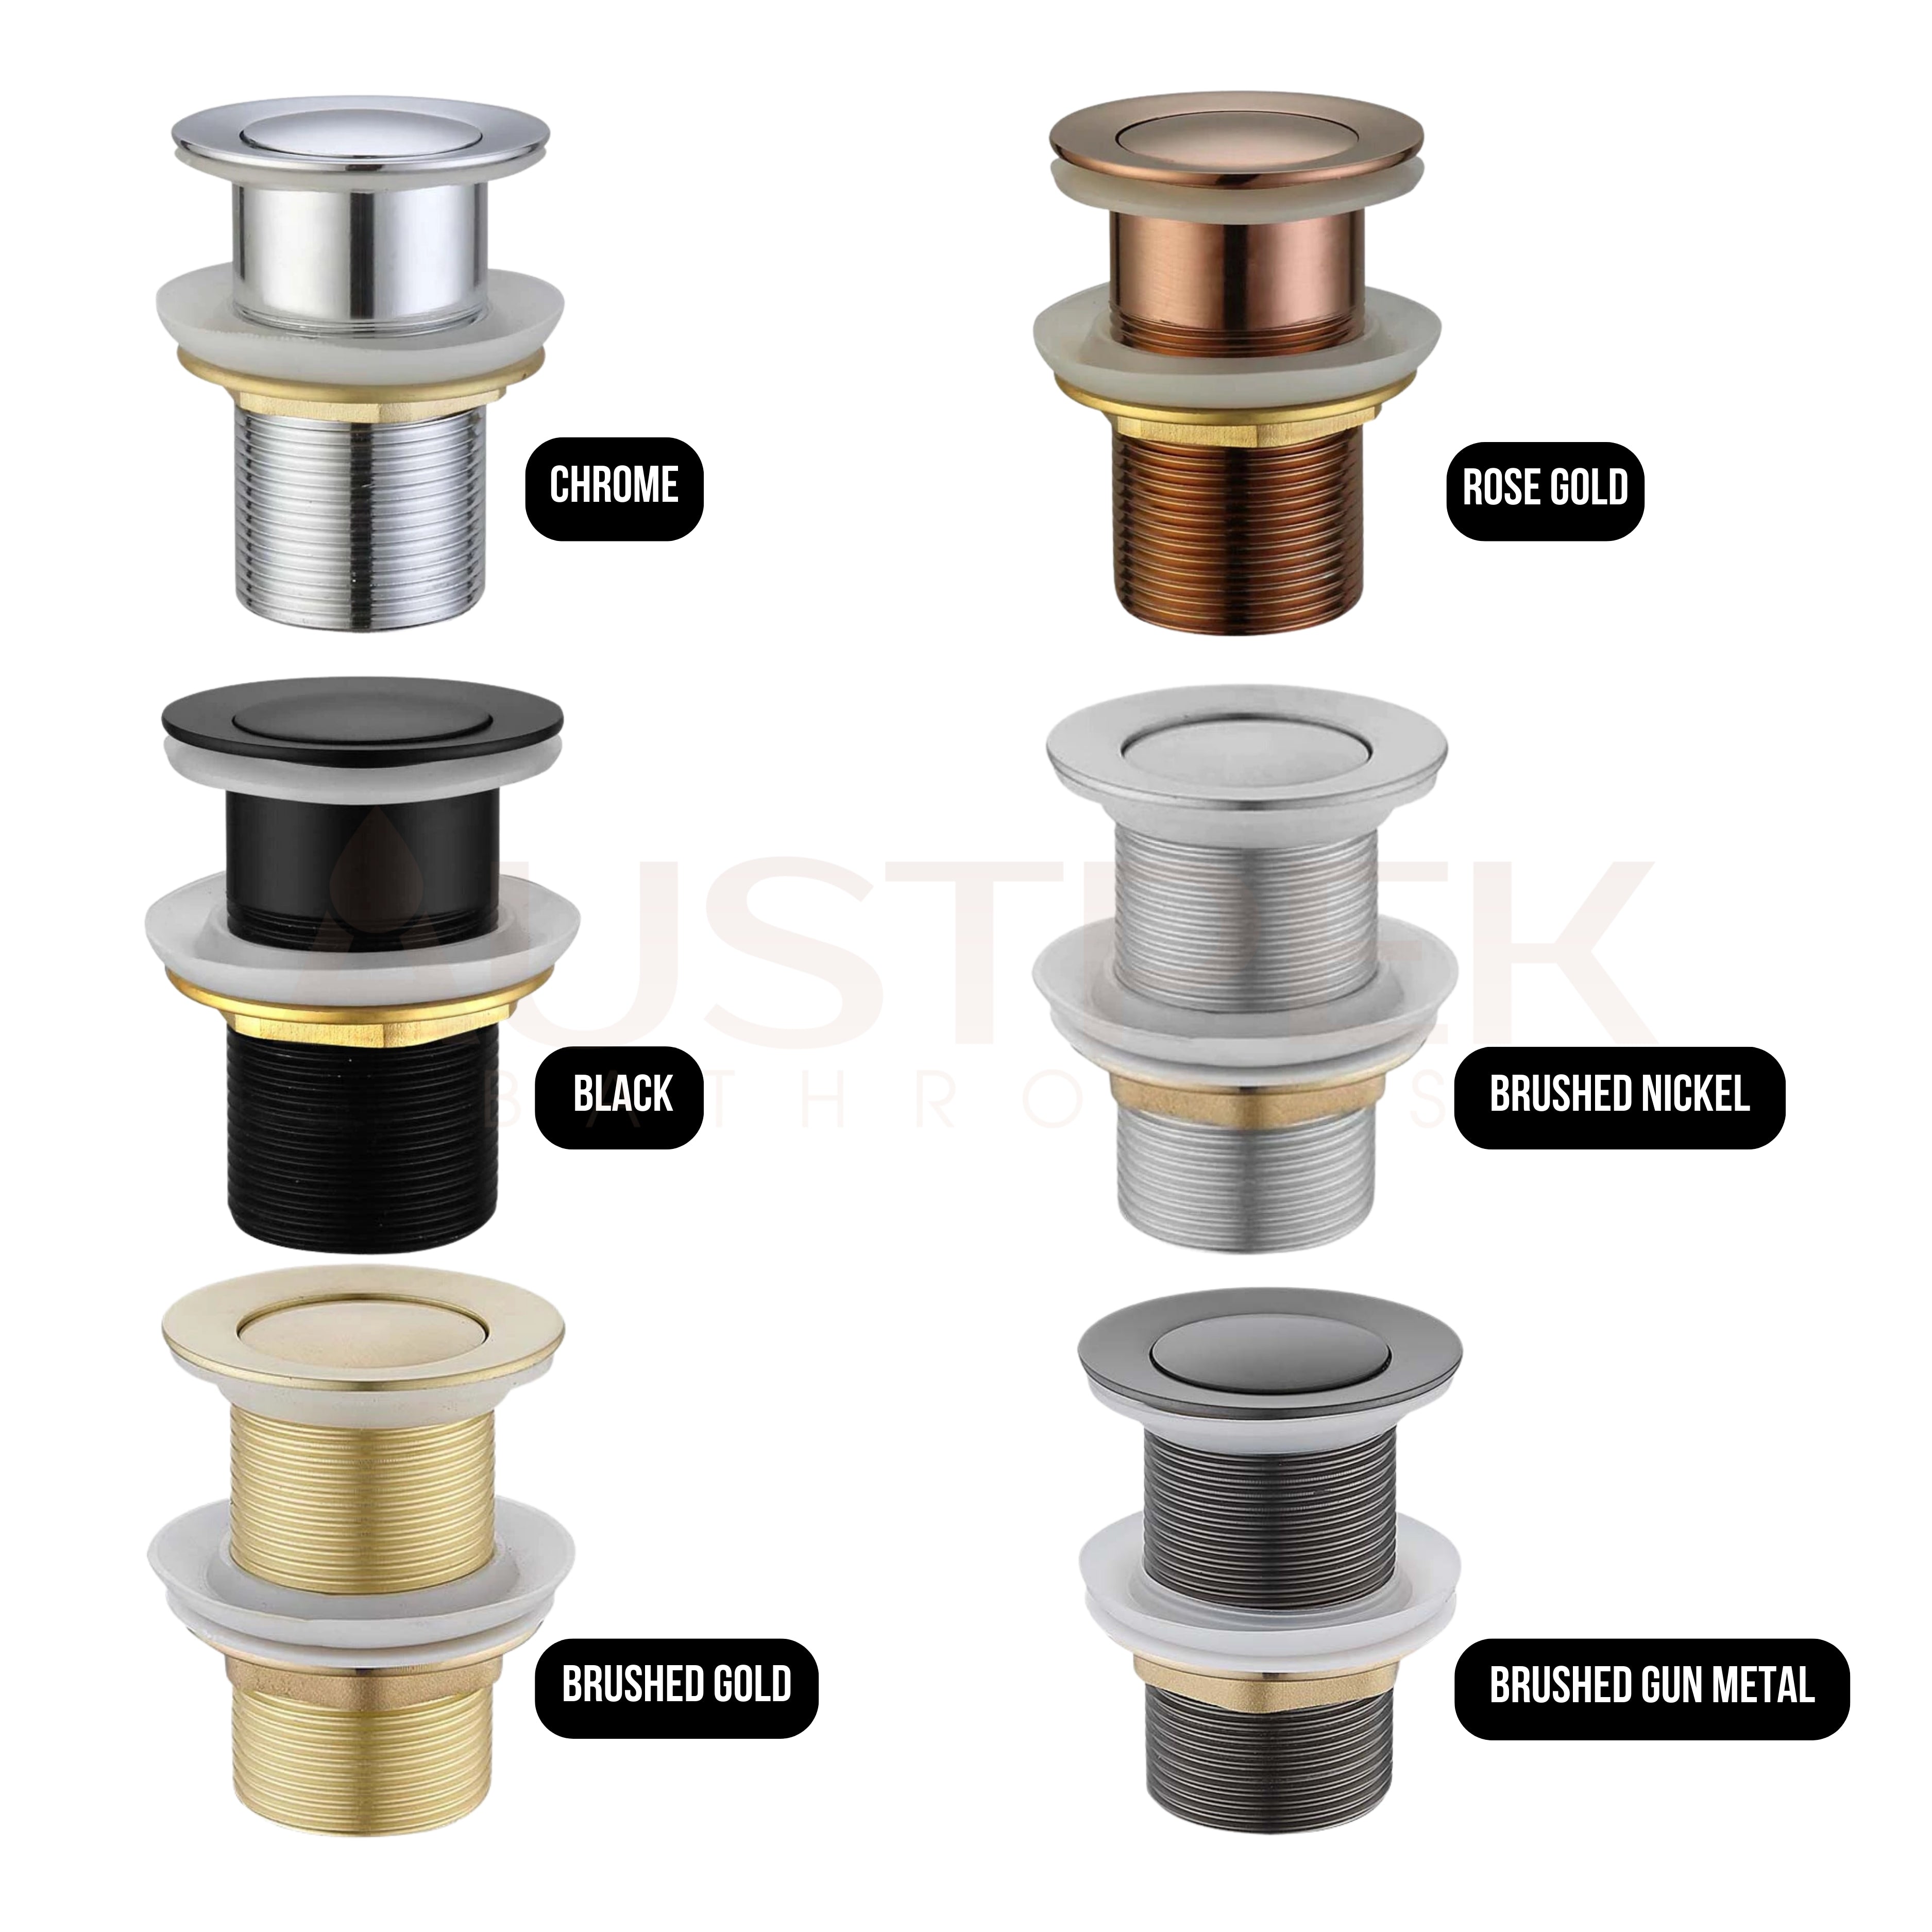 HELLYCAR PUSH PLUG WASTE NON-OVERFLOW BRUSHED NICKEL 32MM